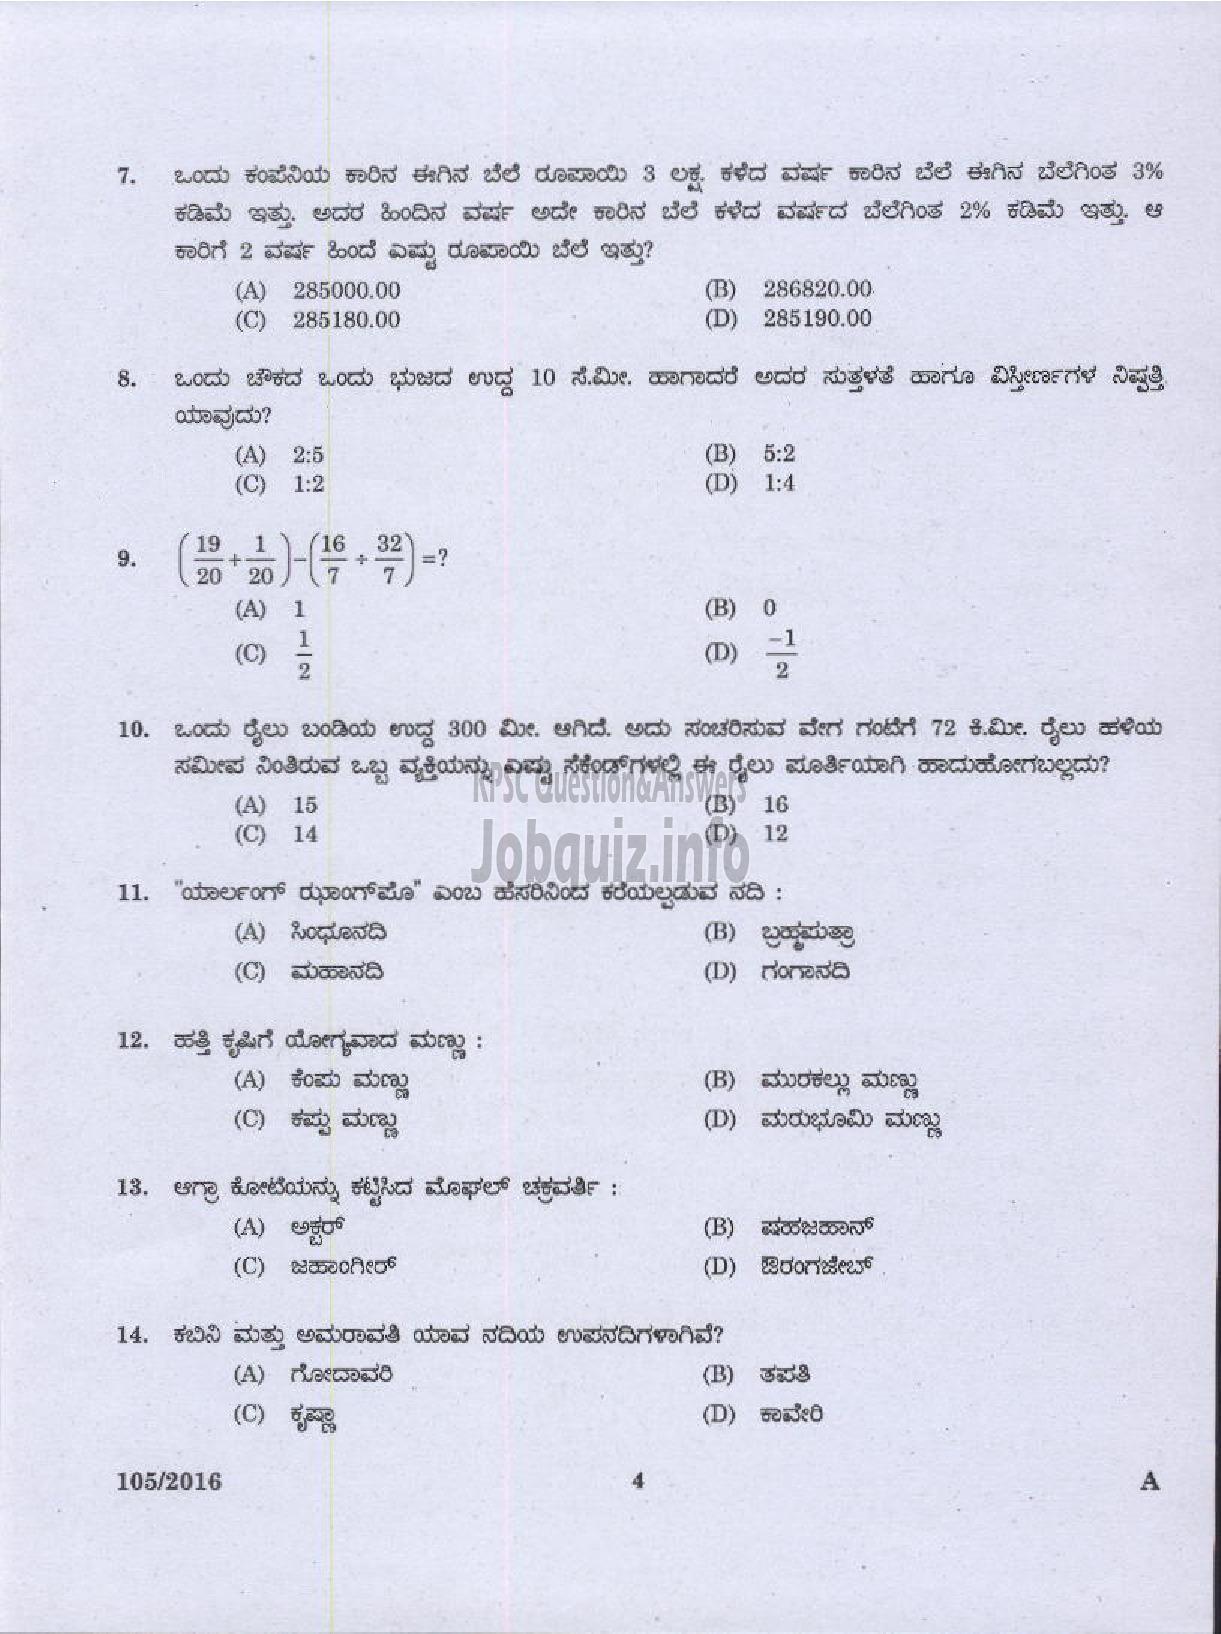 Kerala PSC Question Paper - LOWER DIVISION CLERK KANNADA AND MALAYALAM KNOWING VARIOUS-2